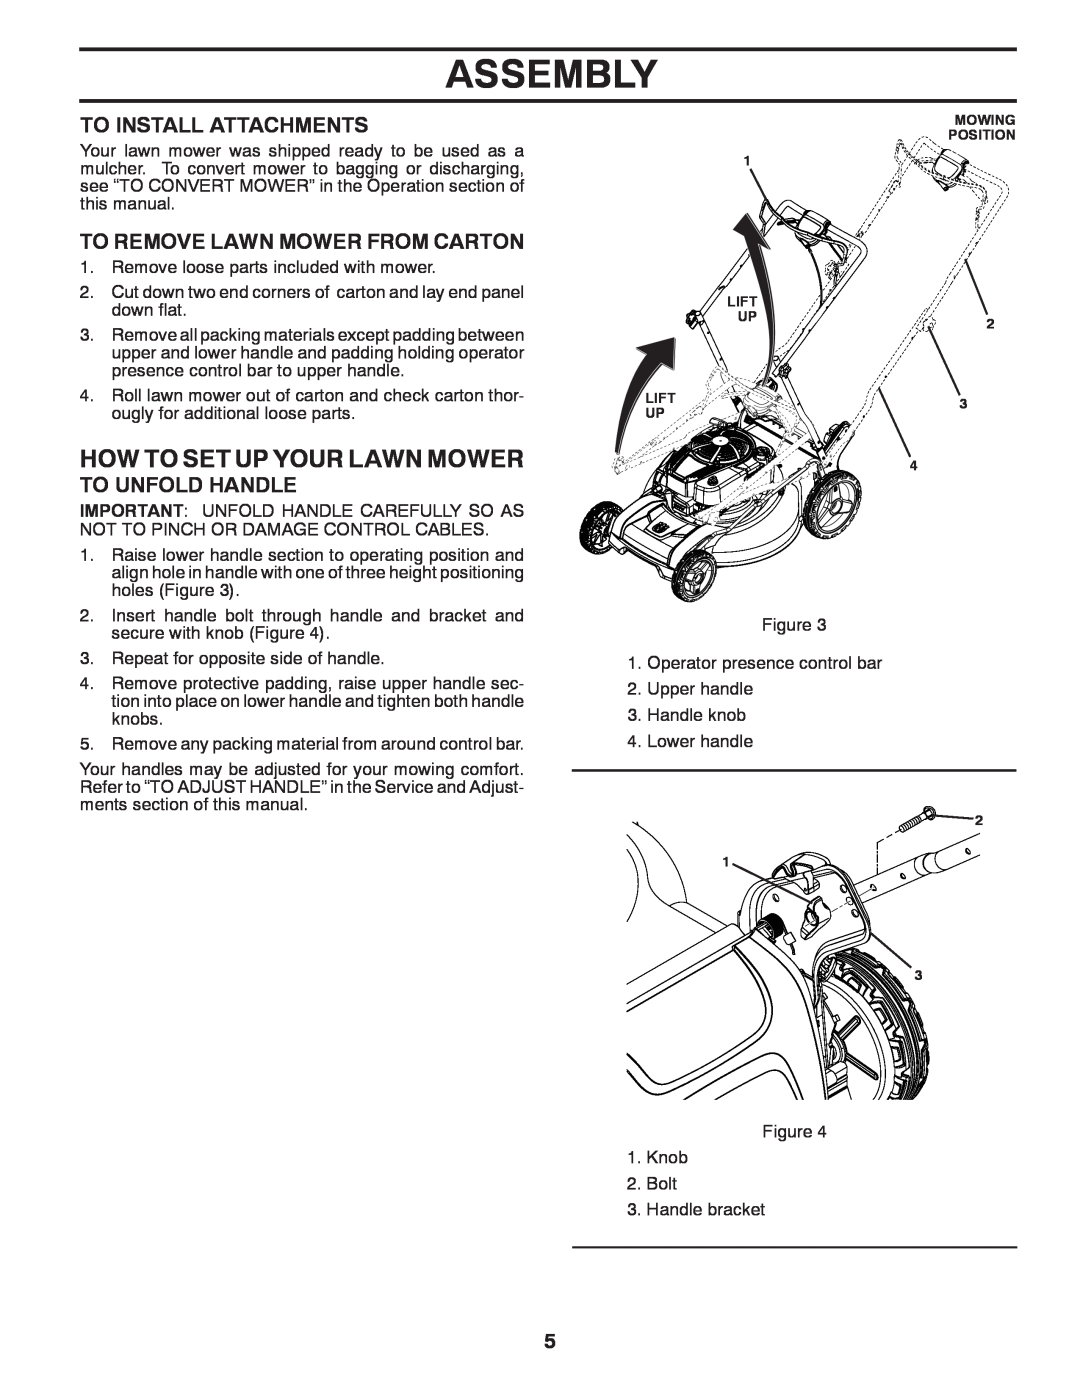 Husqvarna HU775H / 961450007 How To Set Up Your Lawn Mower, To Install Attachments, To Remove Lawn Mower From Carton 